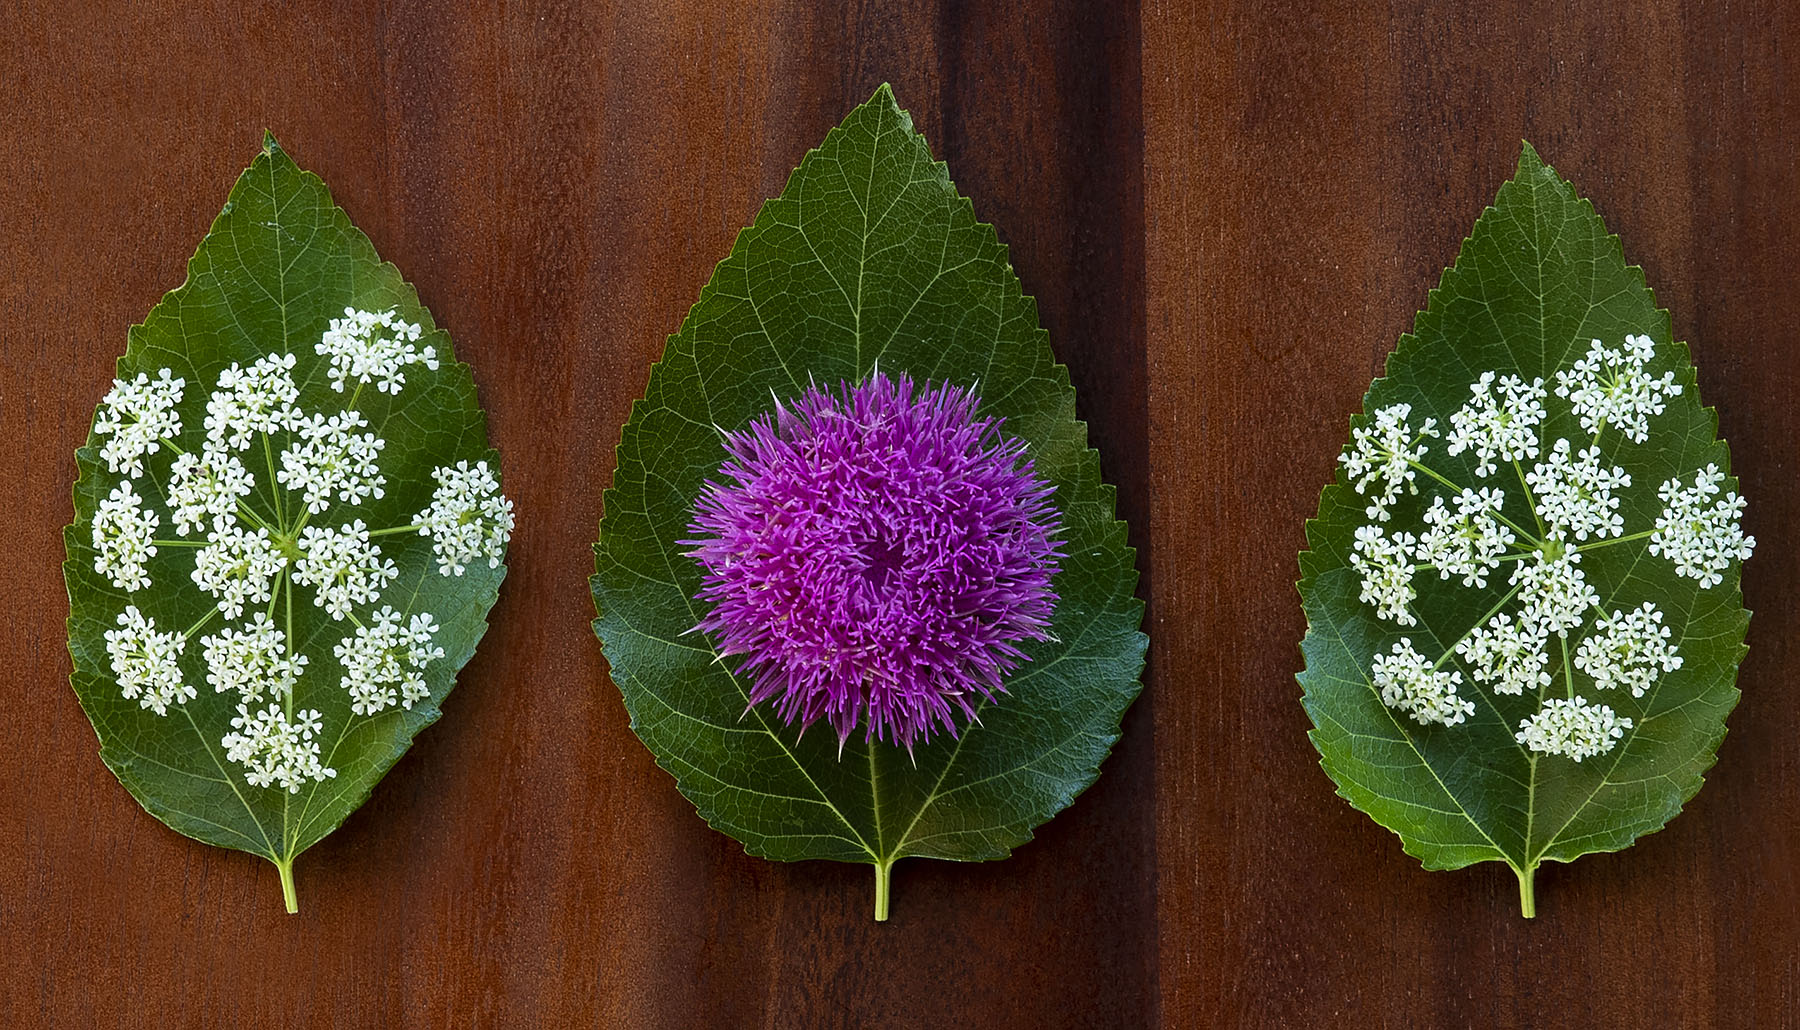 Arrangement of flowers and leaves on wood